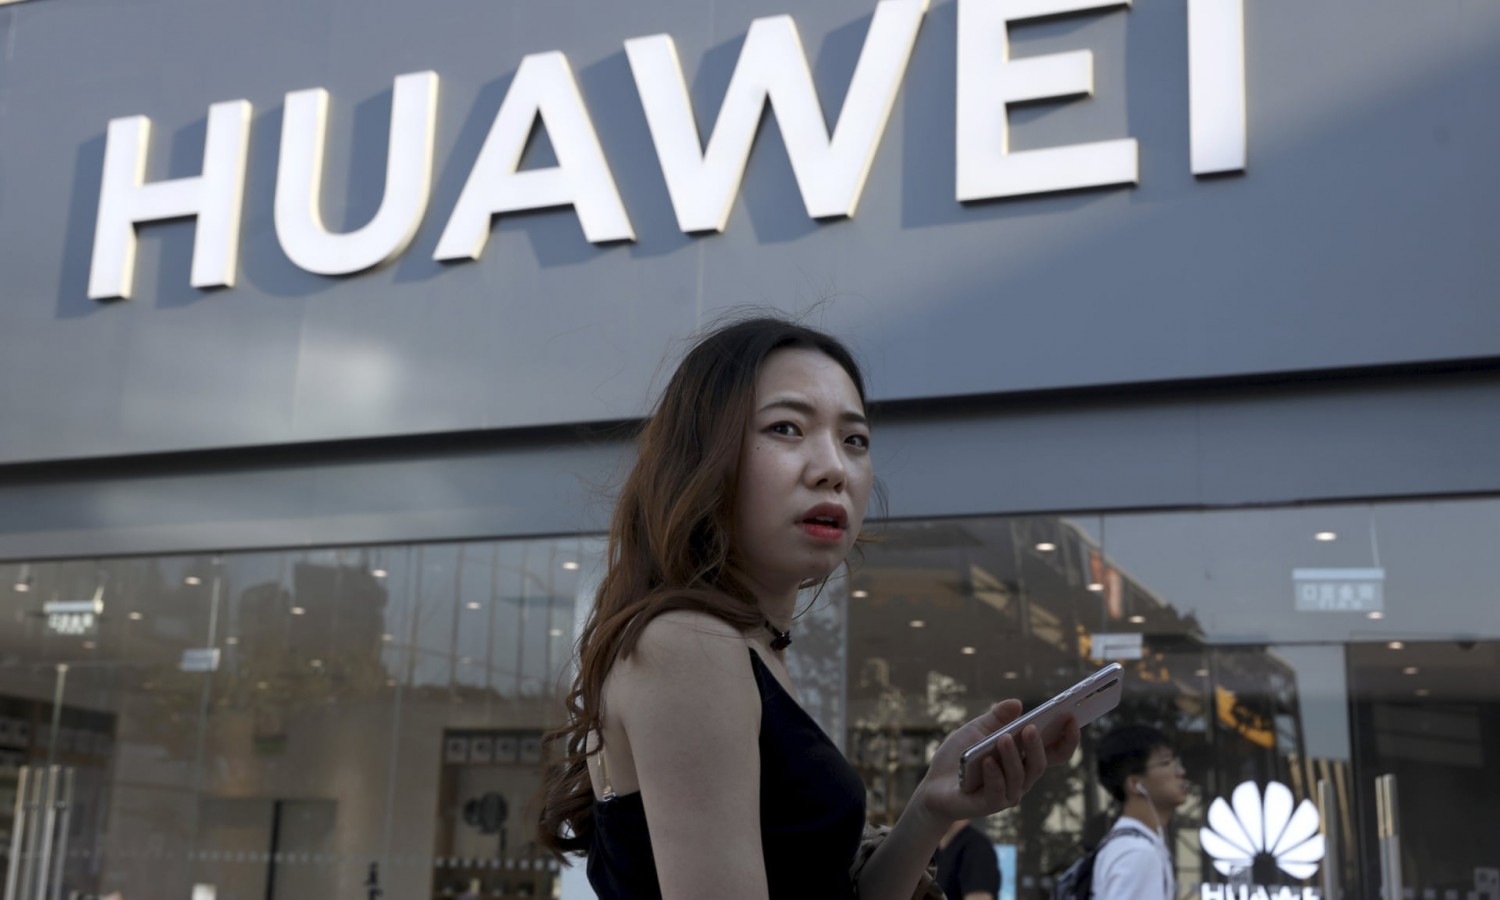 A woman uses a smartphone outside a Huawei store in Beijing Photograph: Ng Han Guan/AP